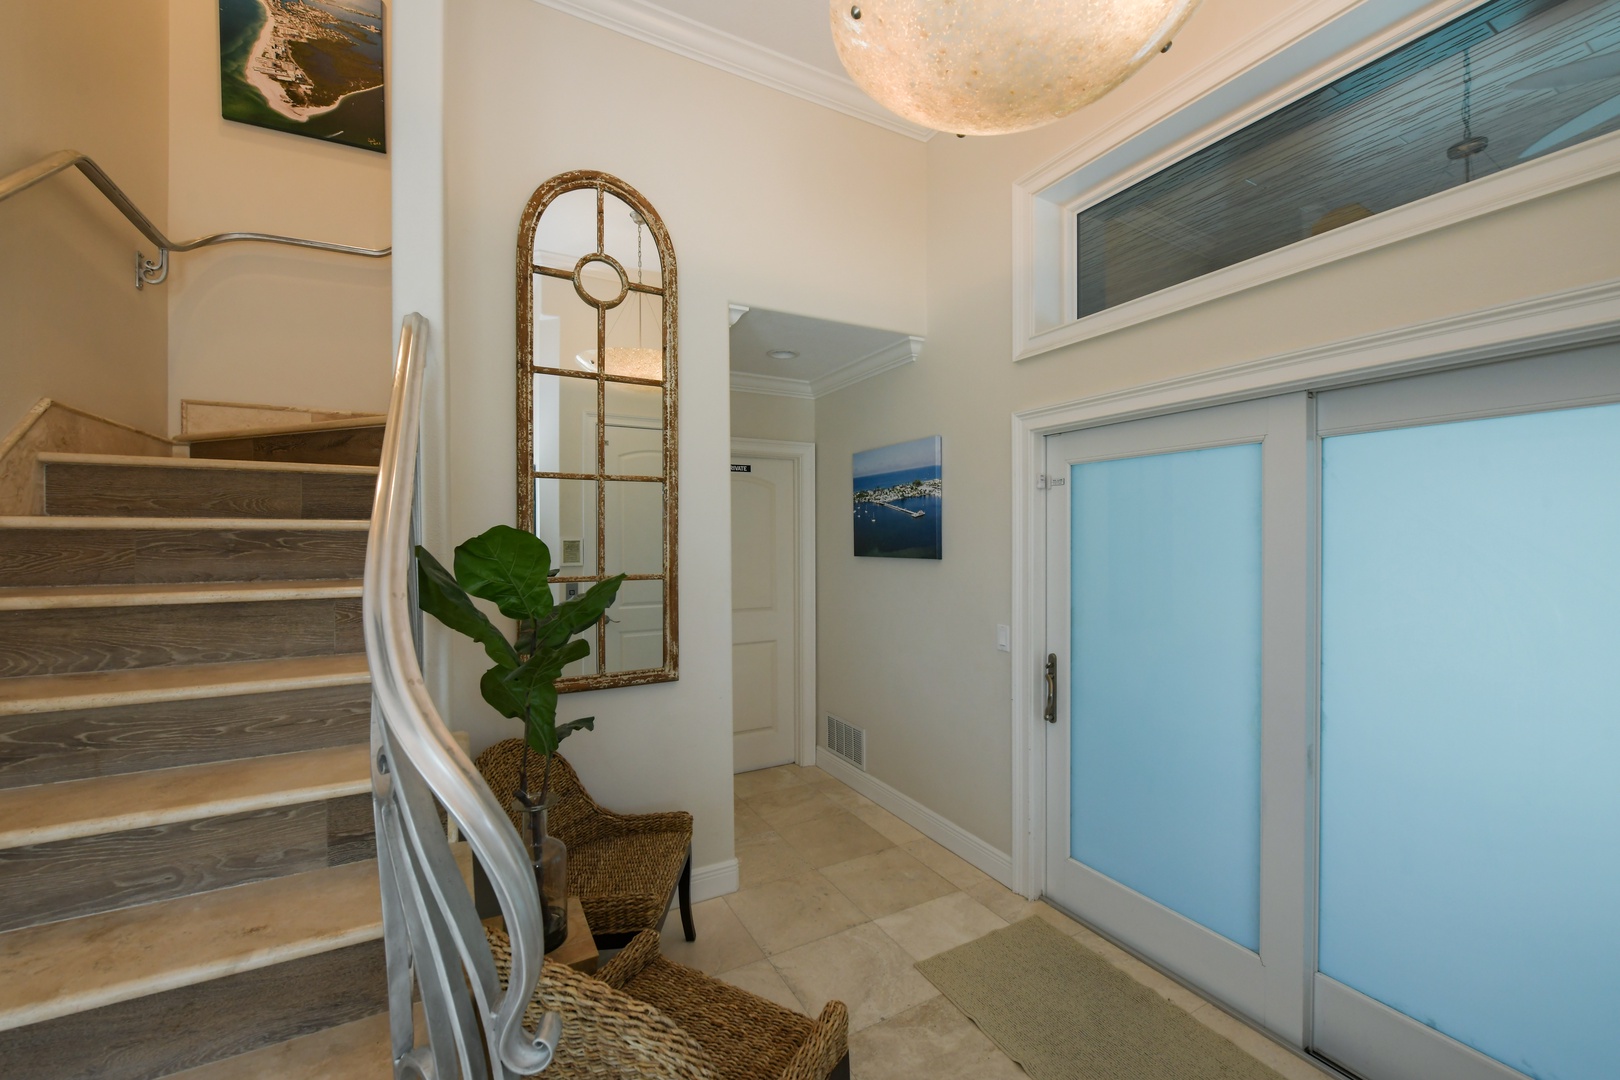 Side A - Foyer - Access To Pool Area